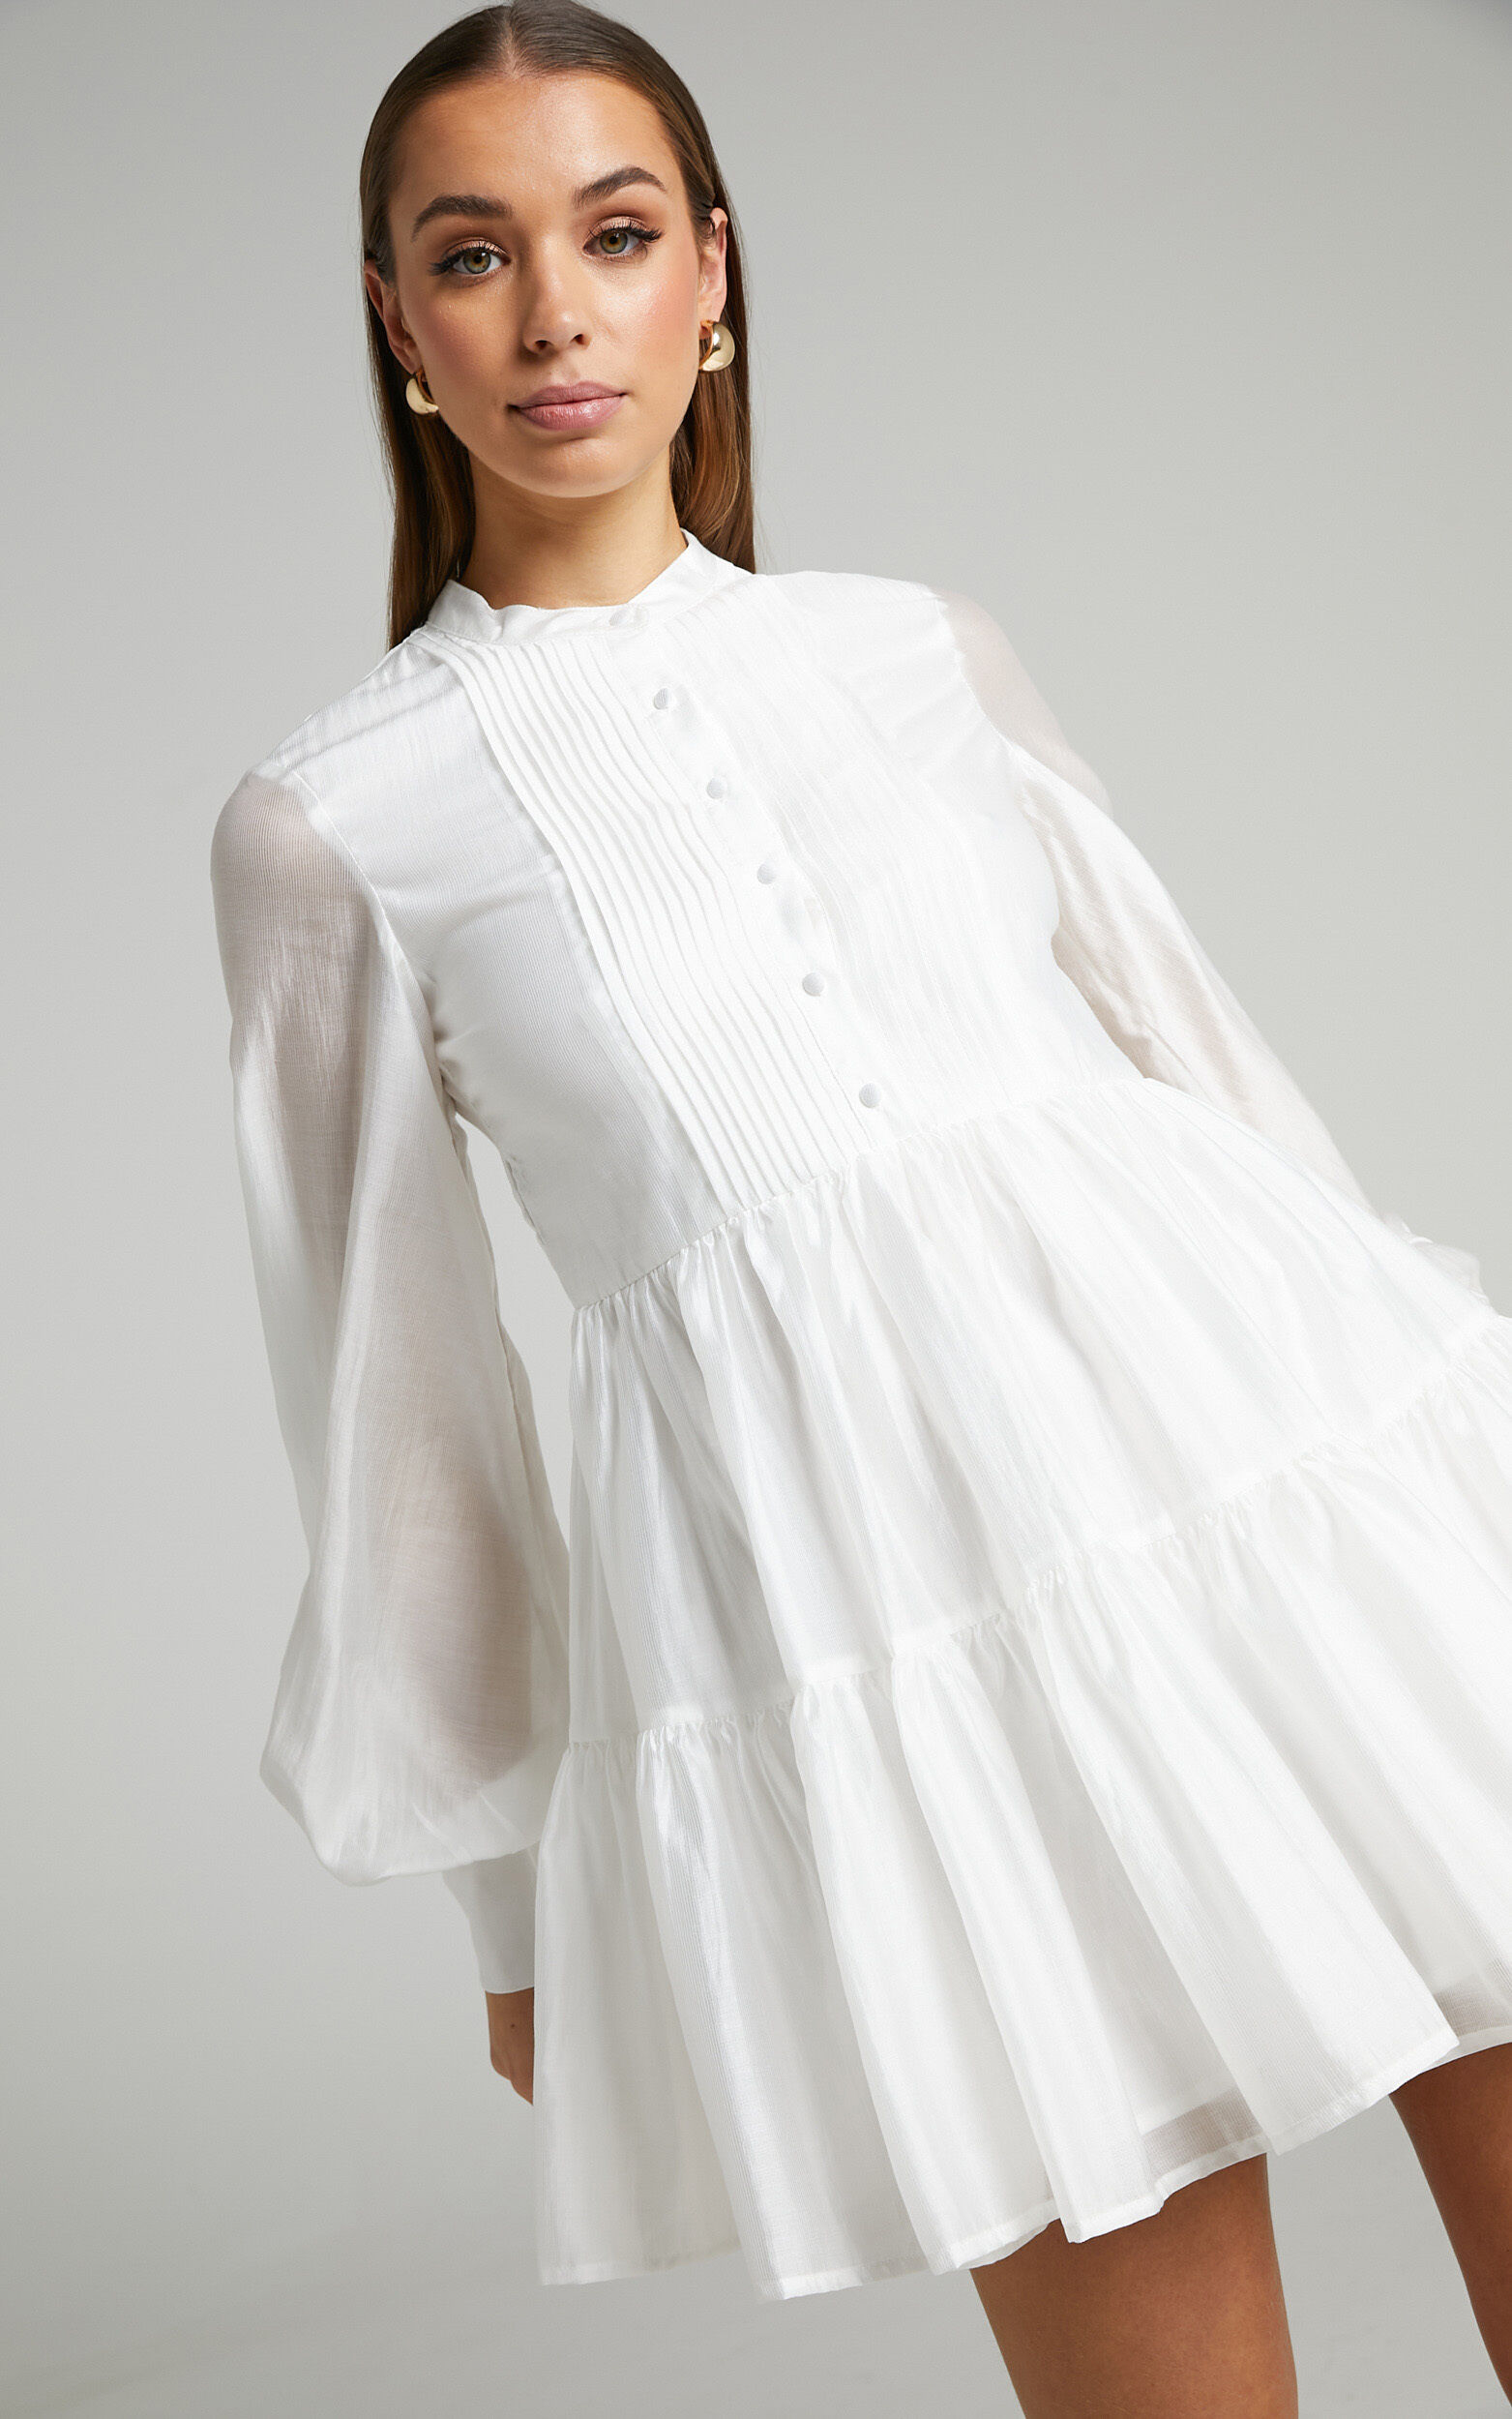 Kyra Pin Tuck Detail Tiered Shift Dress in Off White - 06, WHT3, super-hi-res image number null